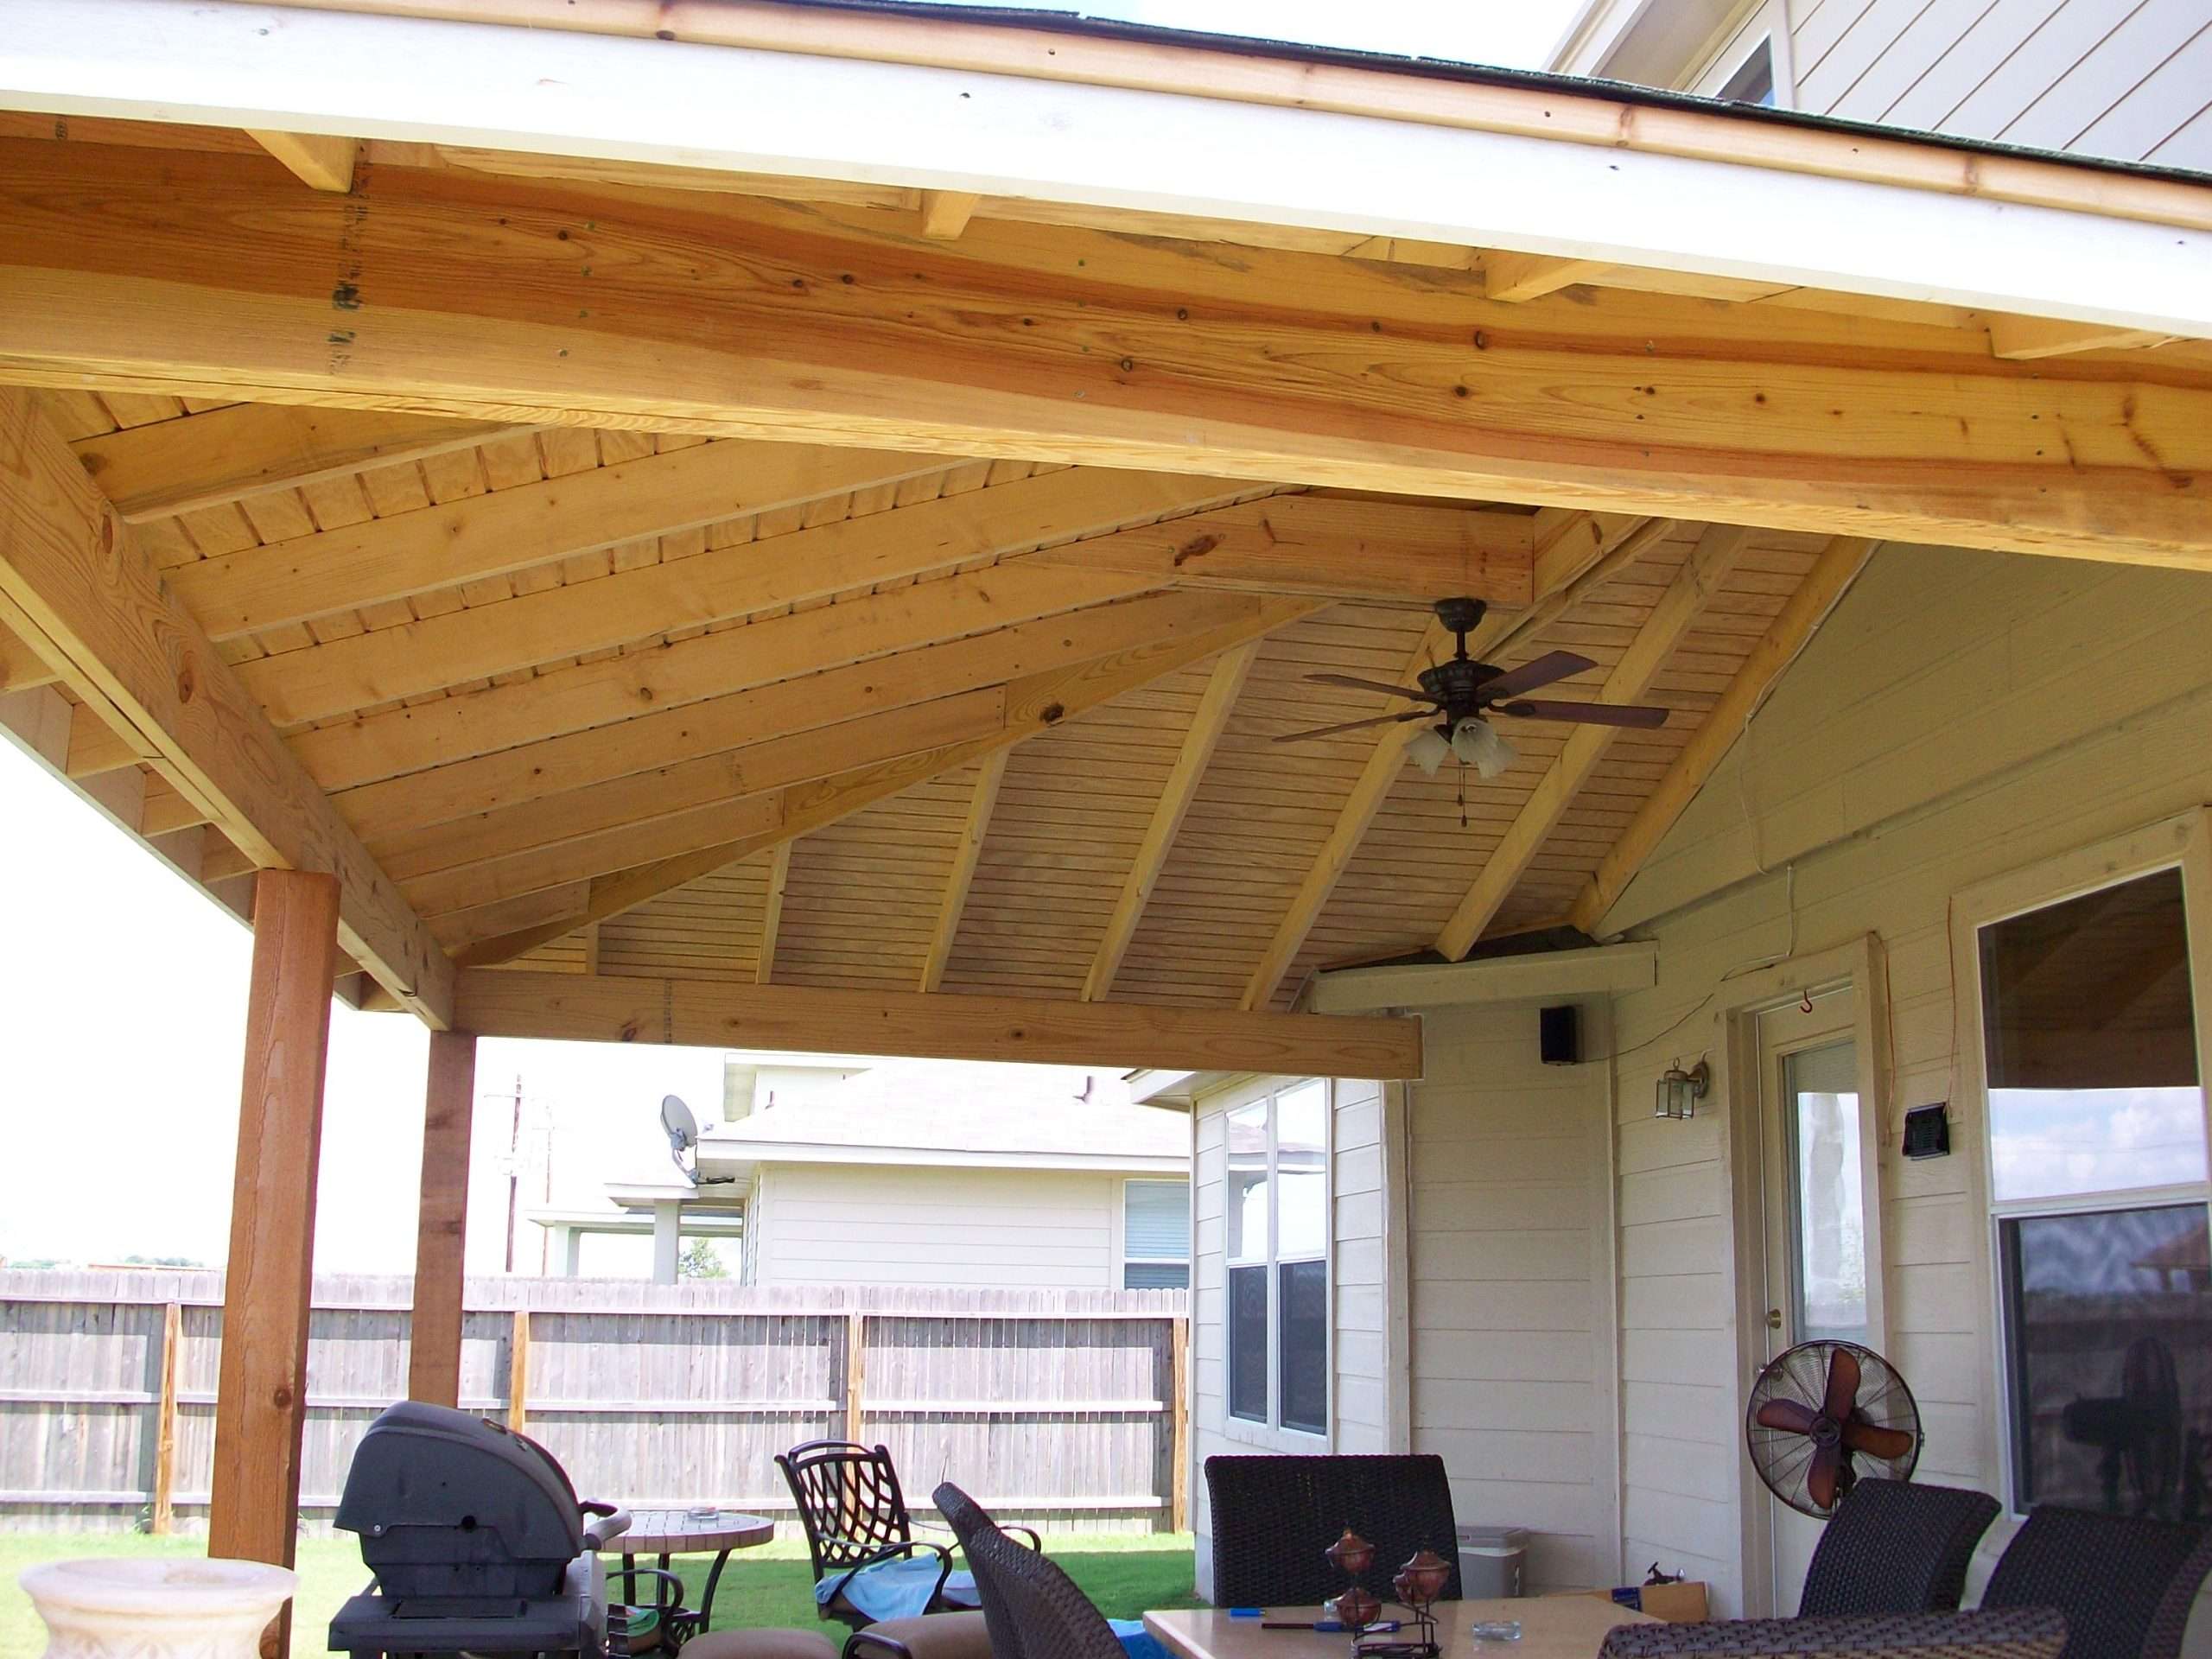 Wooden Patio Covers Design  HomesFeed